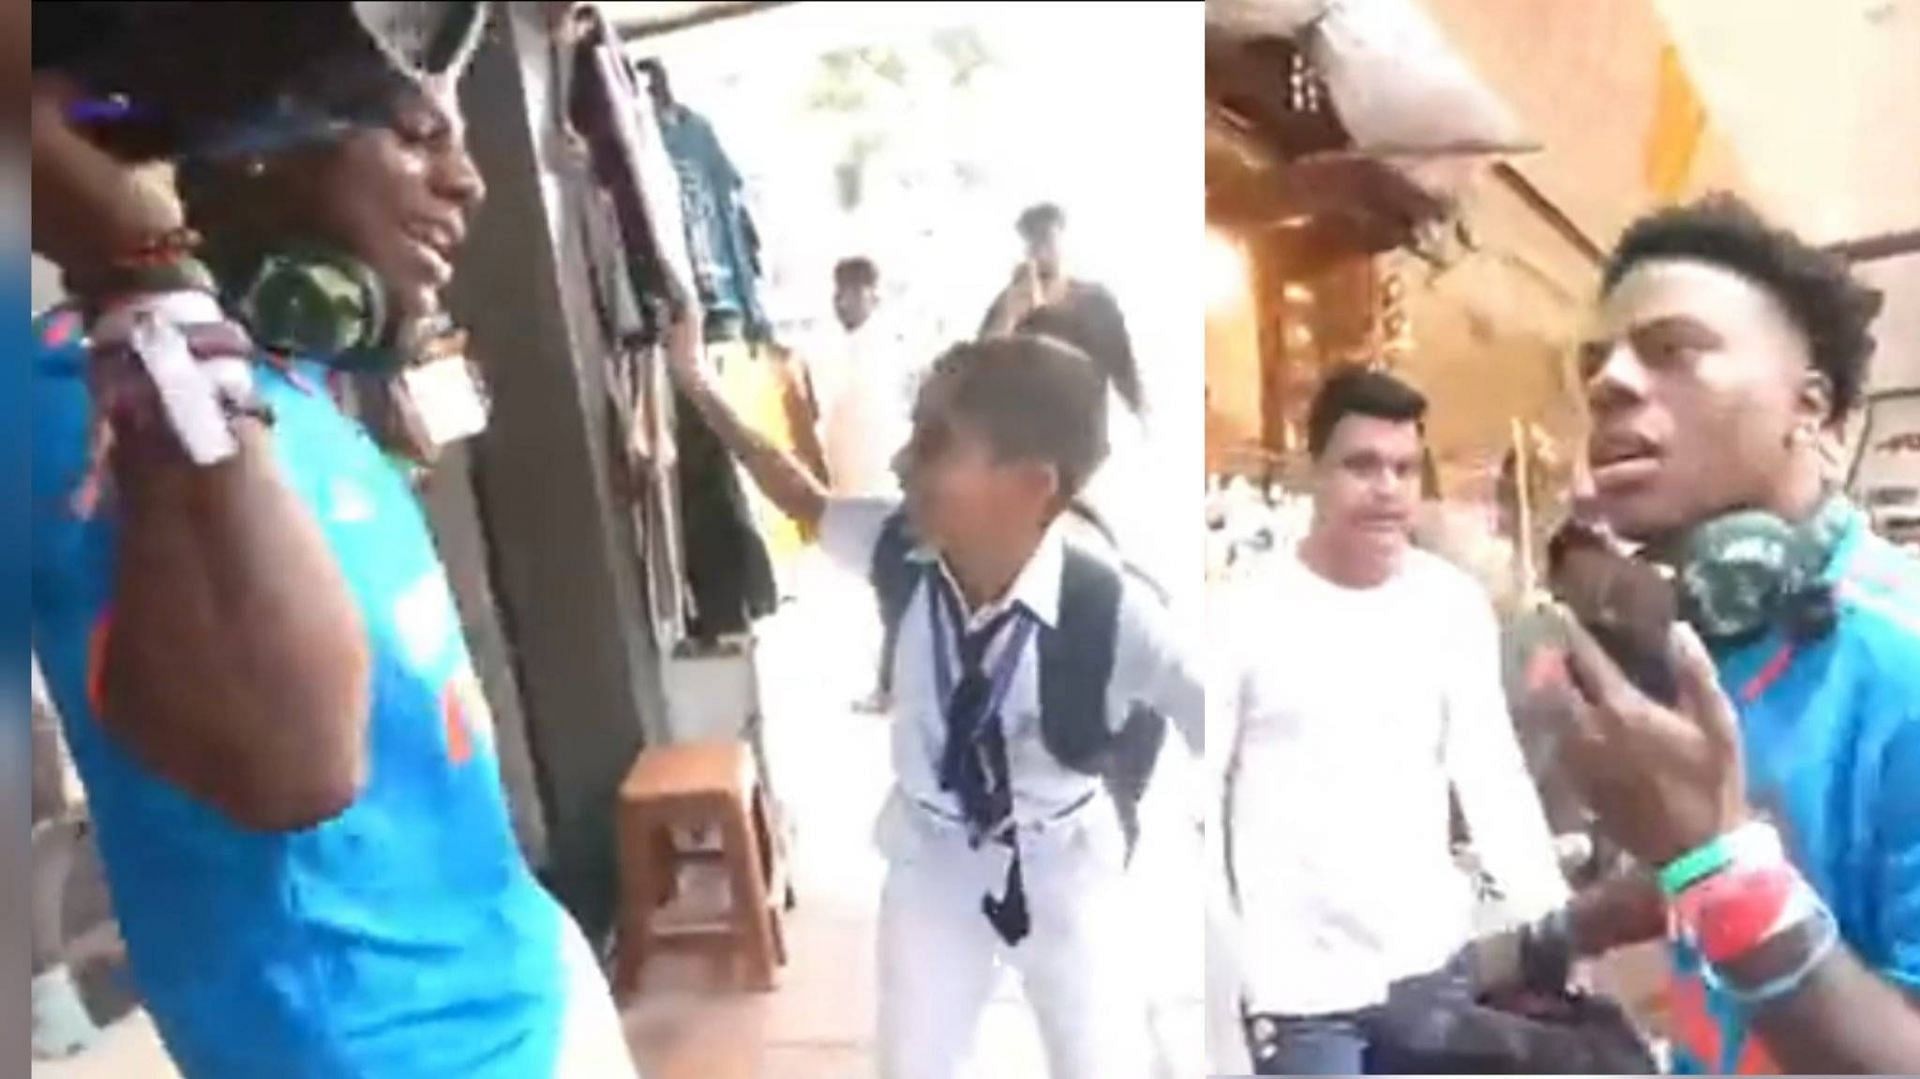 [Watch] IShowSpeed wears Indian cricket team's jersey and plays 'Tunak Tunak' on loudspeaker in streets of Mumbai, asks people to dance